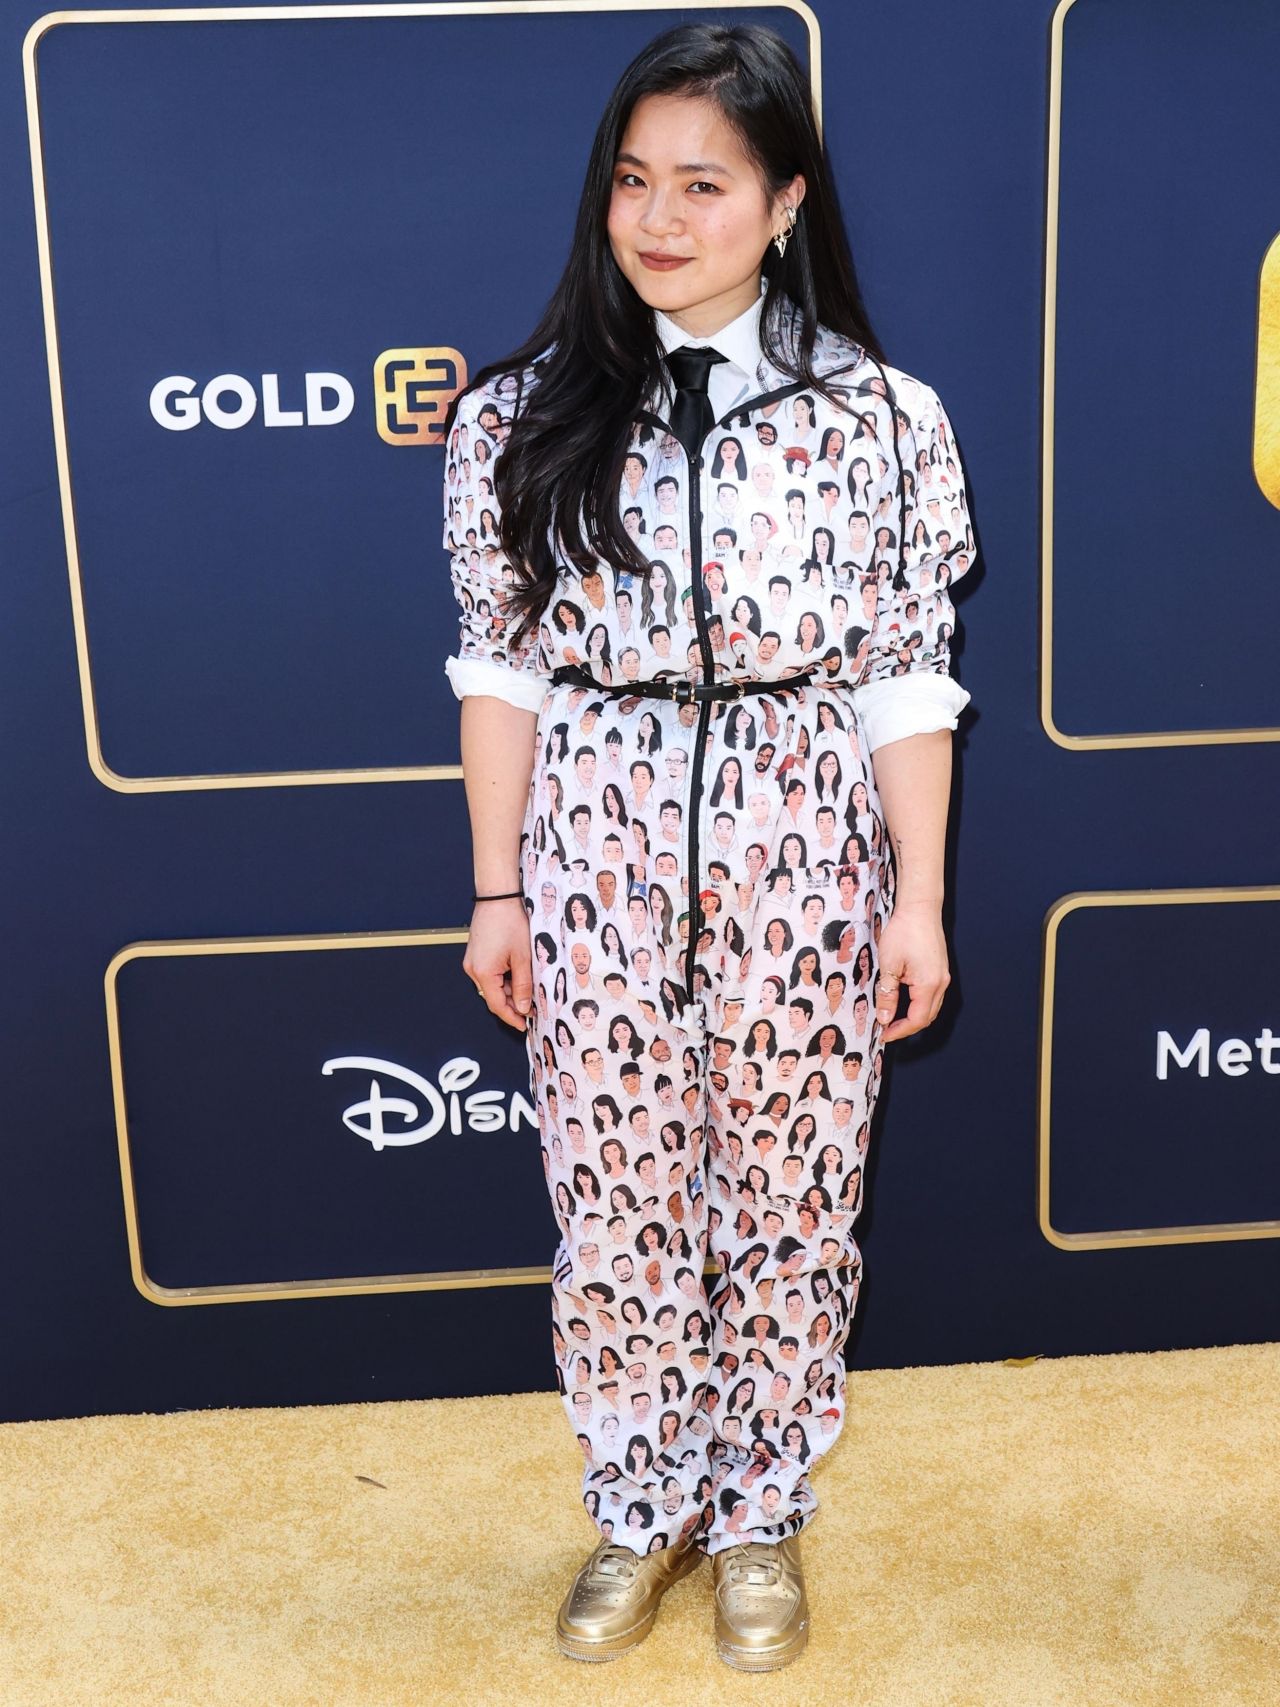 Kelly Marie Tran Kelly-marie-tran-gold-house-s-inaugural-gold-gala-2022-in-los-angeles-05-21-2022-4